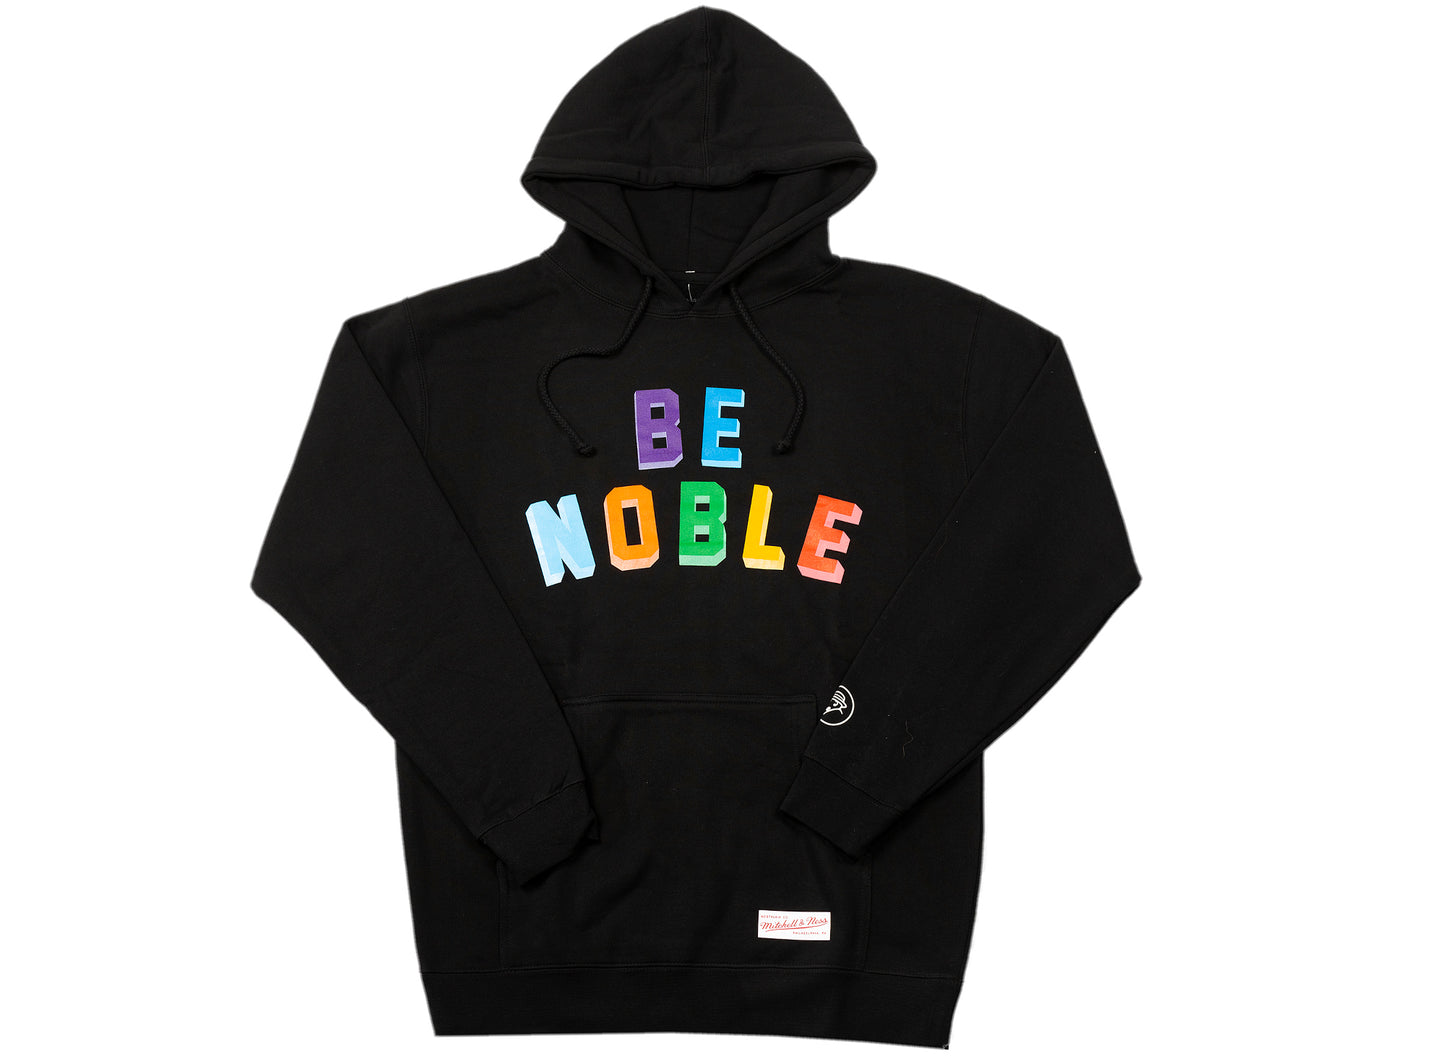 Mitchell Ness x Frank White Noble Hoodie